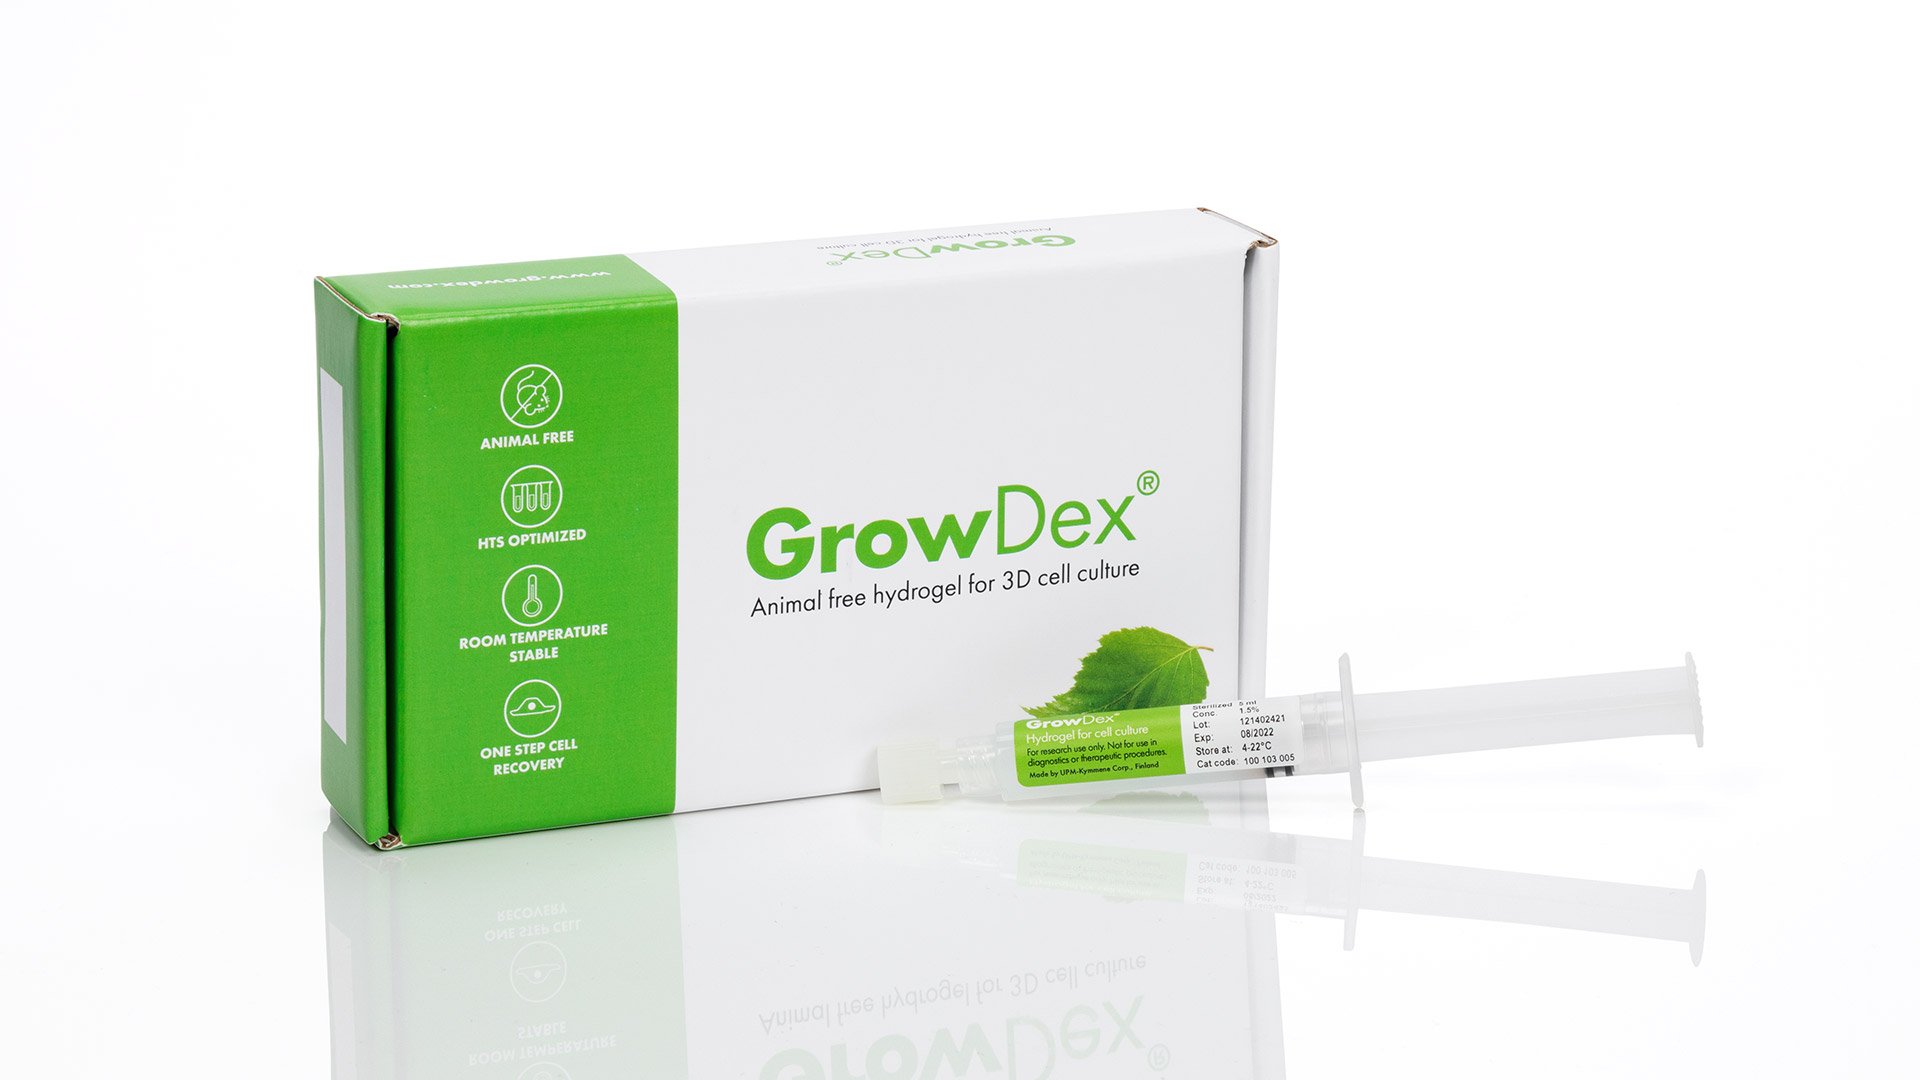 GrowDex®- the natural 3D cell culture hydrogel | UPM Biomedicals